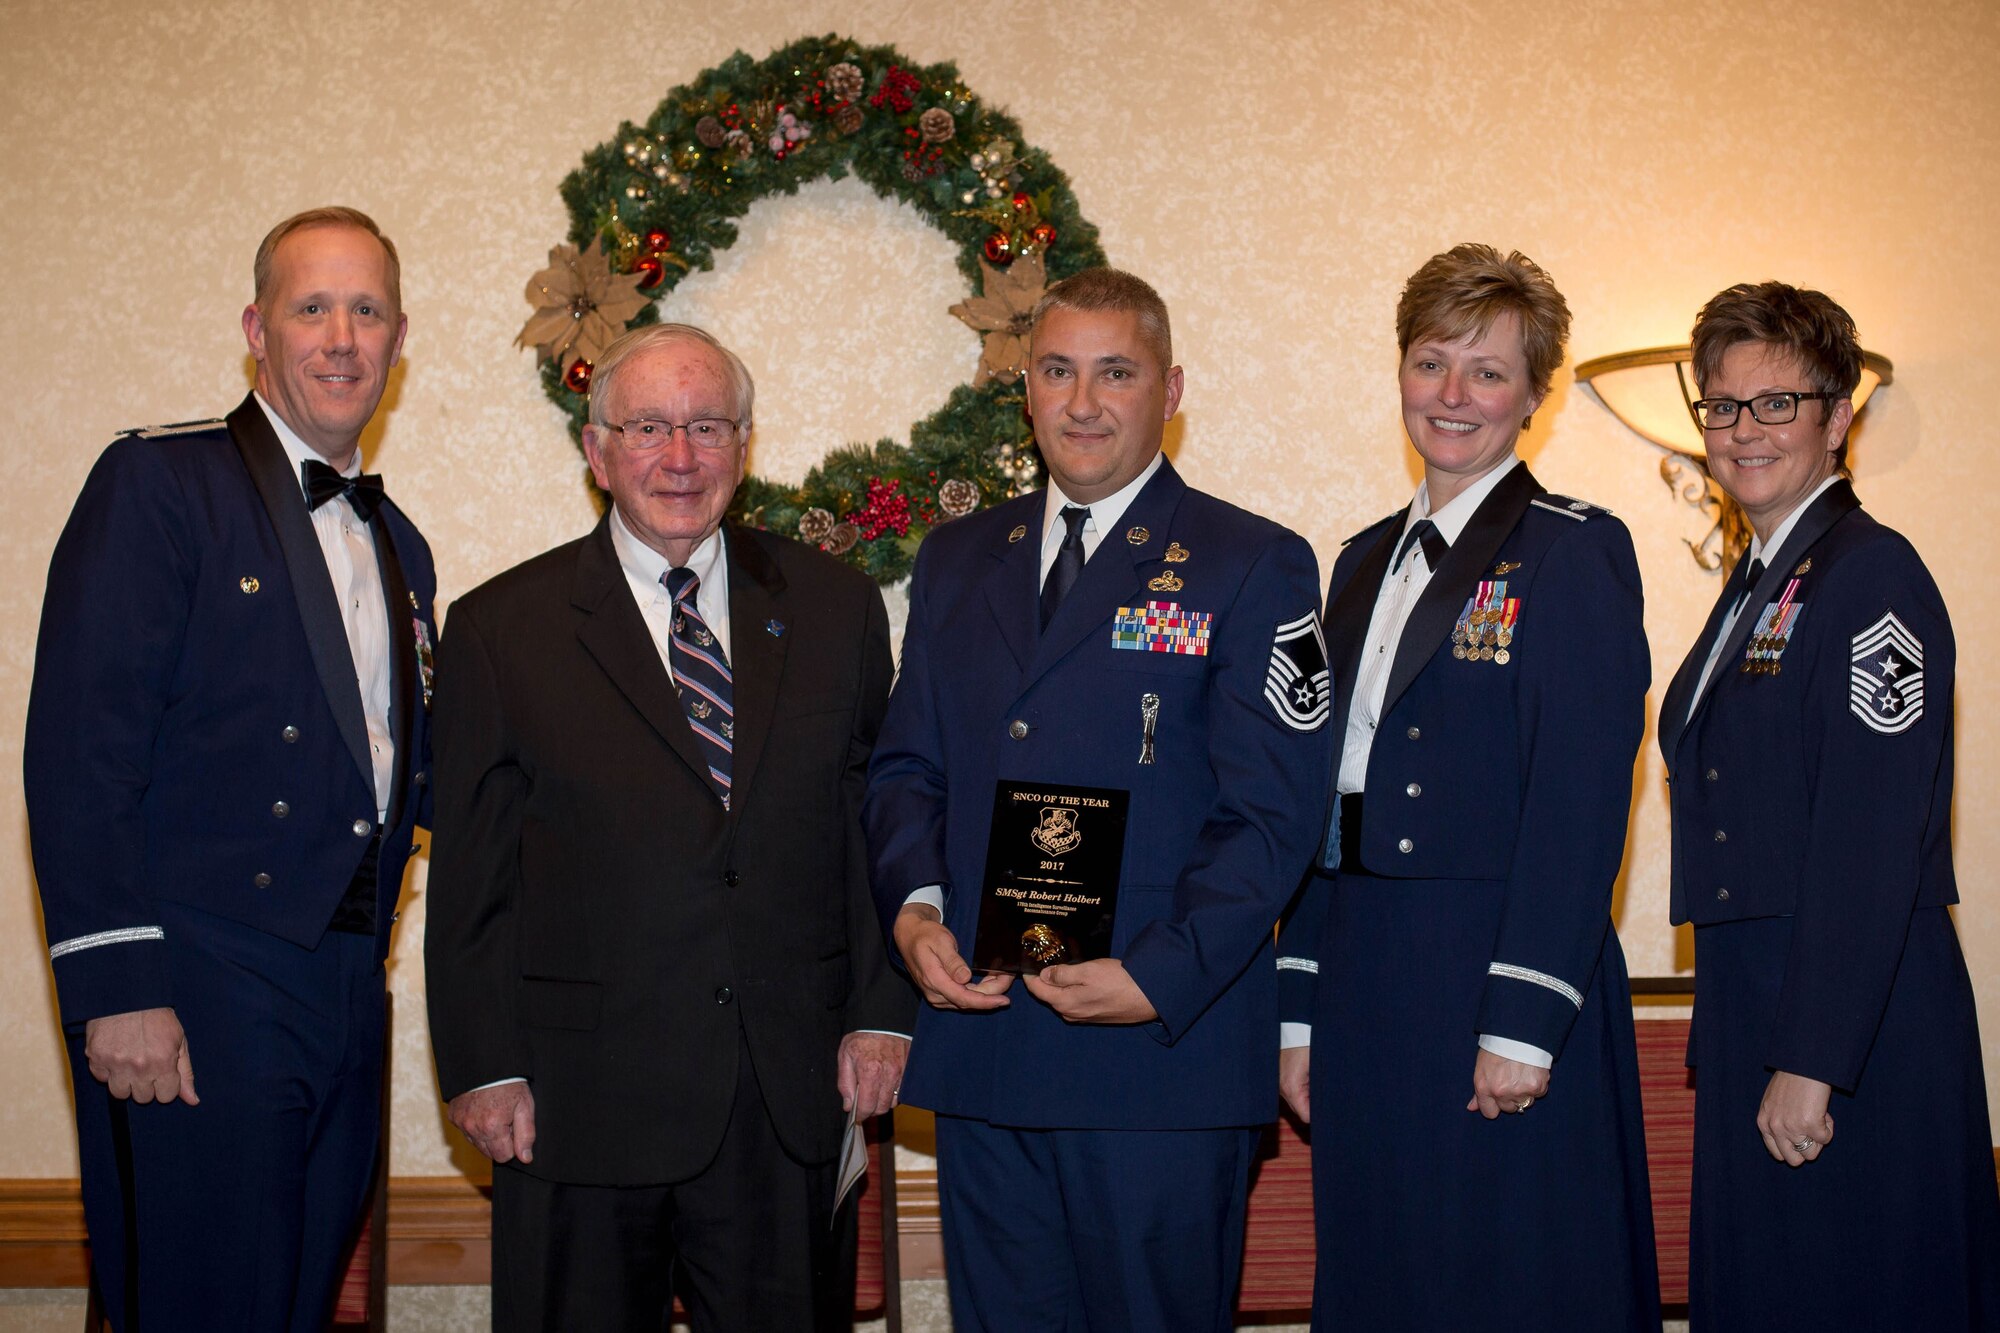 178th Wing Airmen were recognized for outstanding service at the military ball held Dec. 2 at the Marriott in Springfield, Ohio.